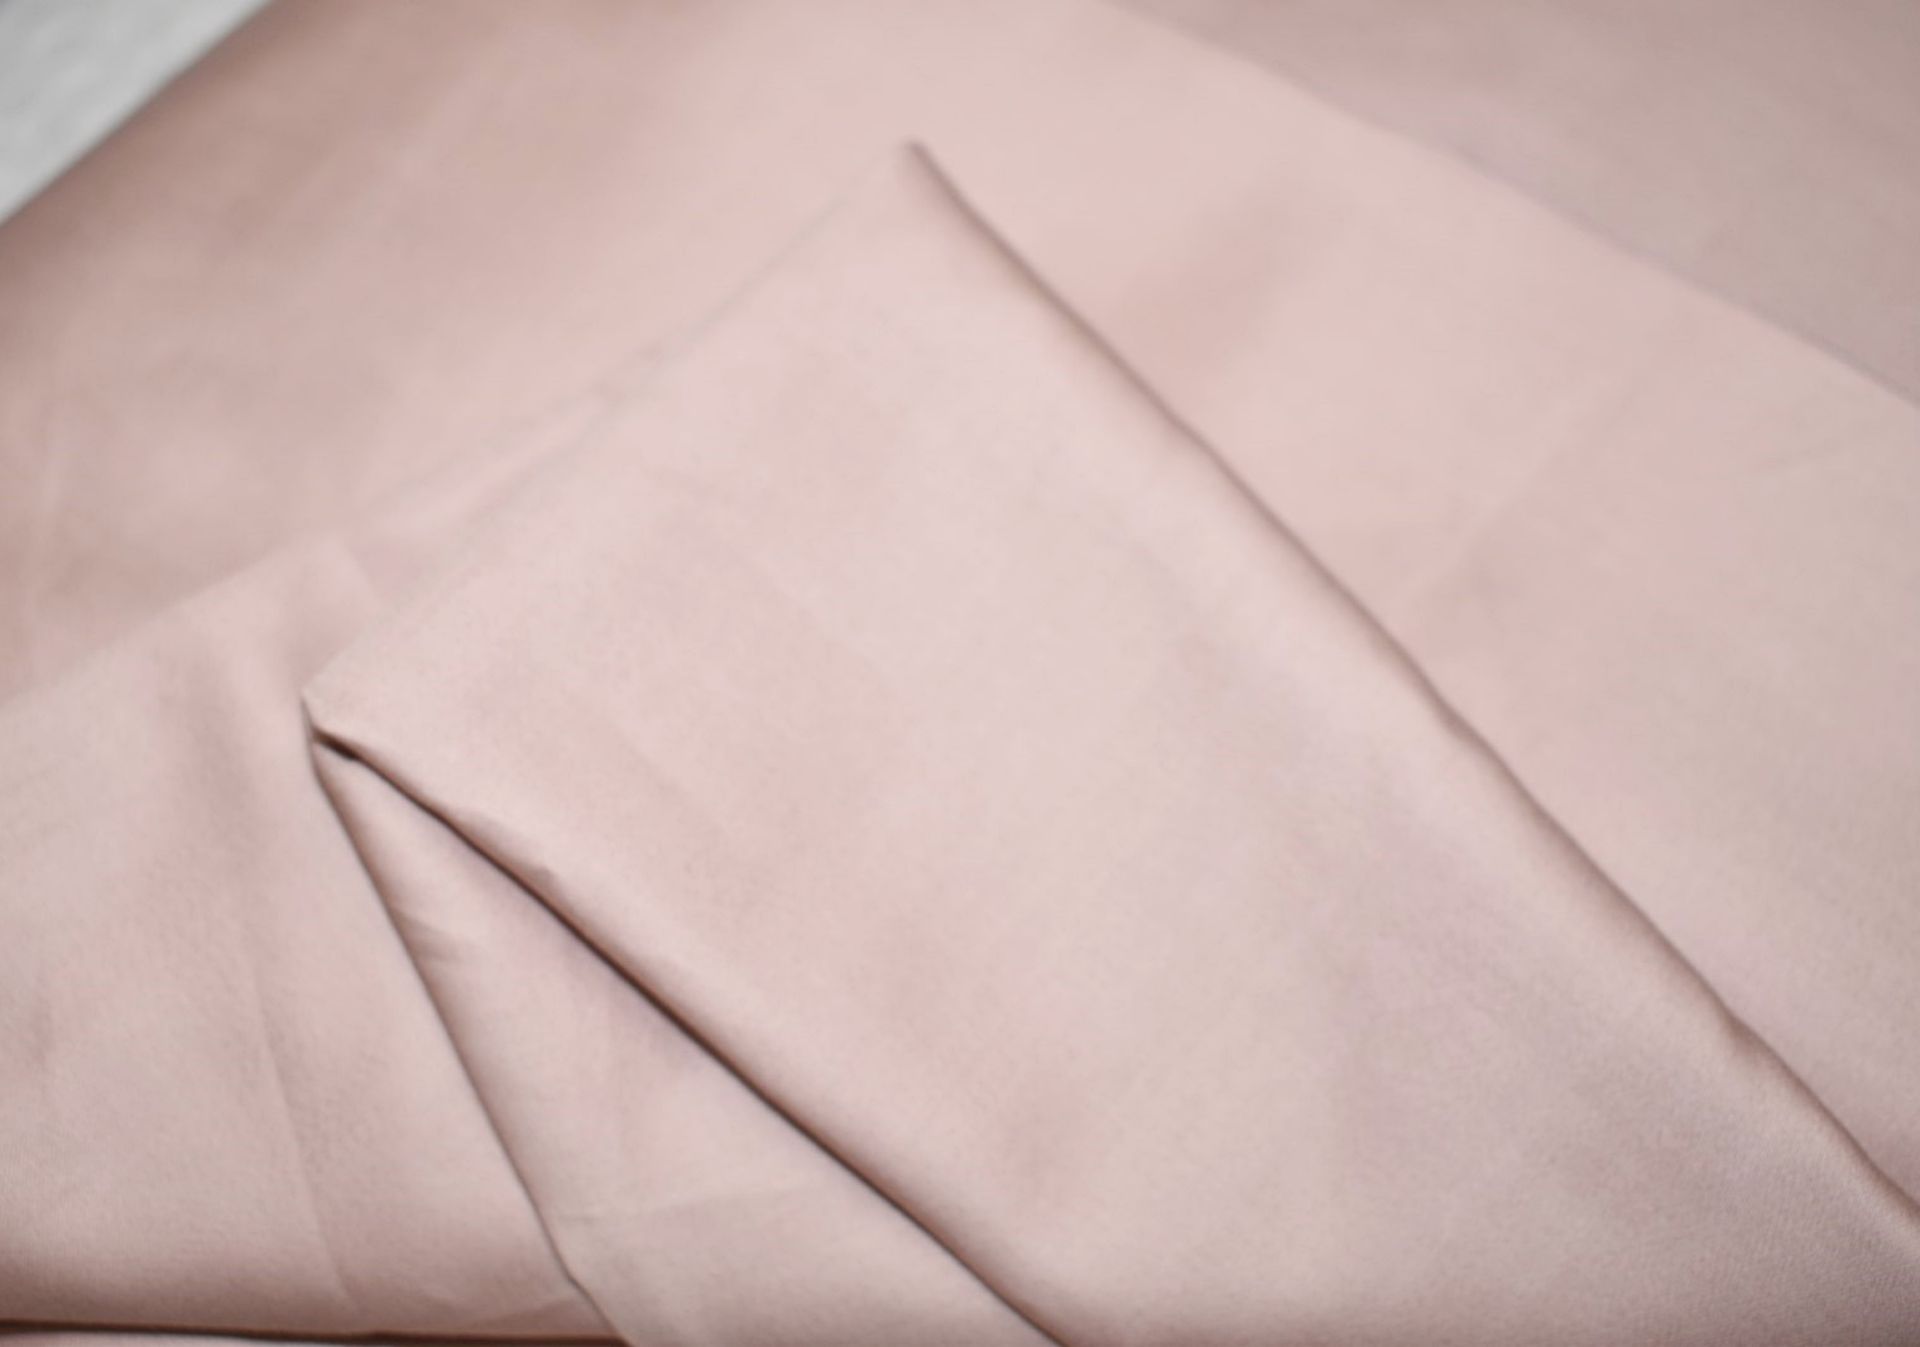 1 x AMALIA 'Suave' Luxury King Fitted Sheet In Charm Pink (150cm x 200cm) - Original Price £99.00 - Image 6 of 7